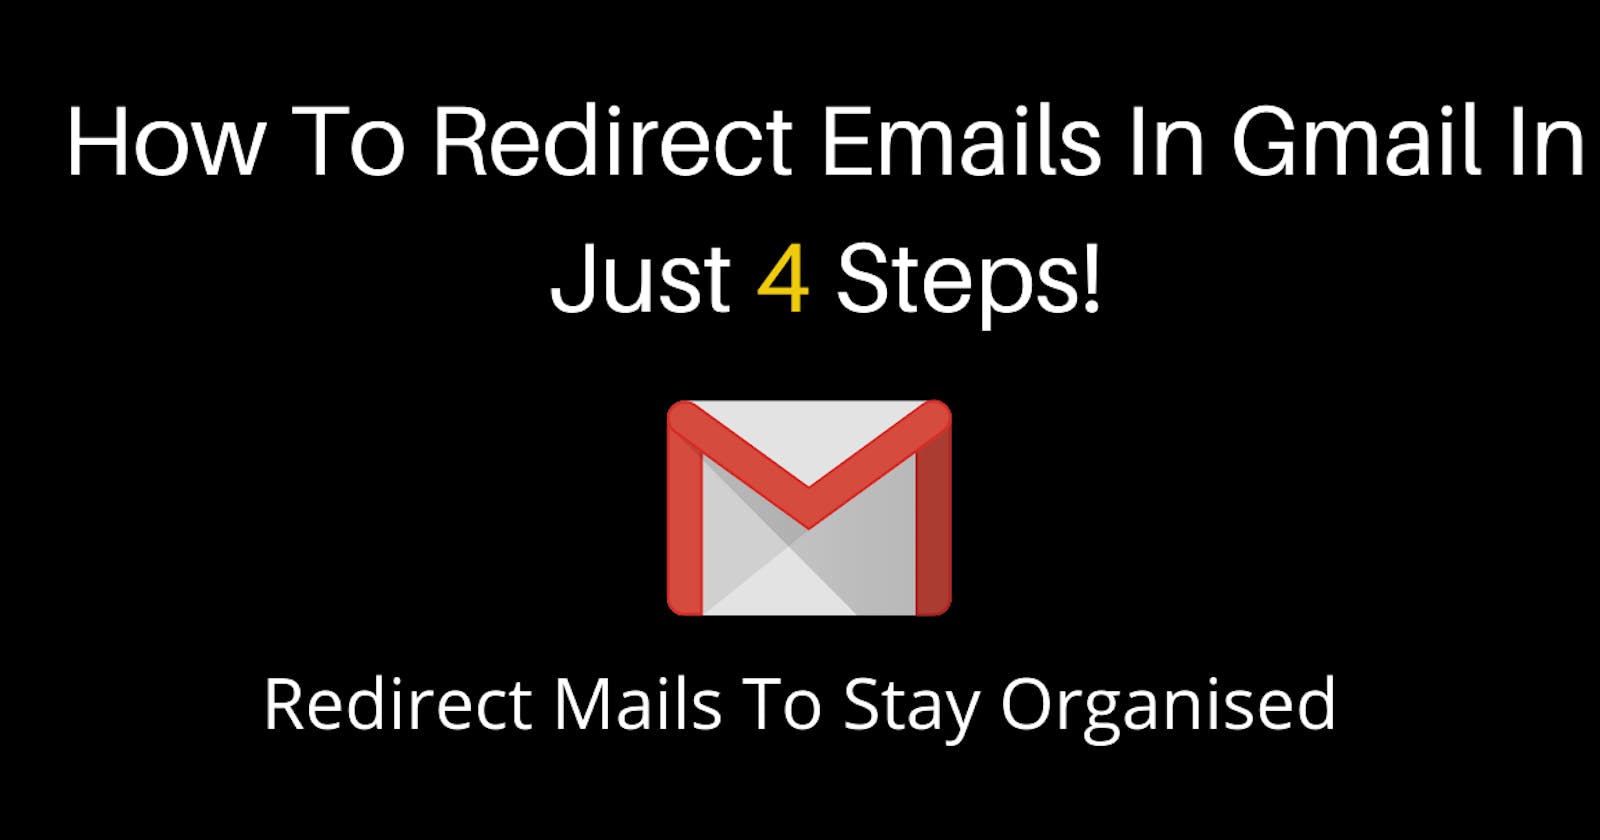 How To Redirect Emails In Gmail In Just 4 Steps!